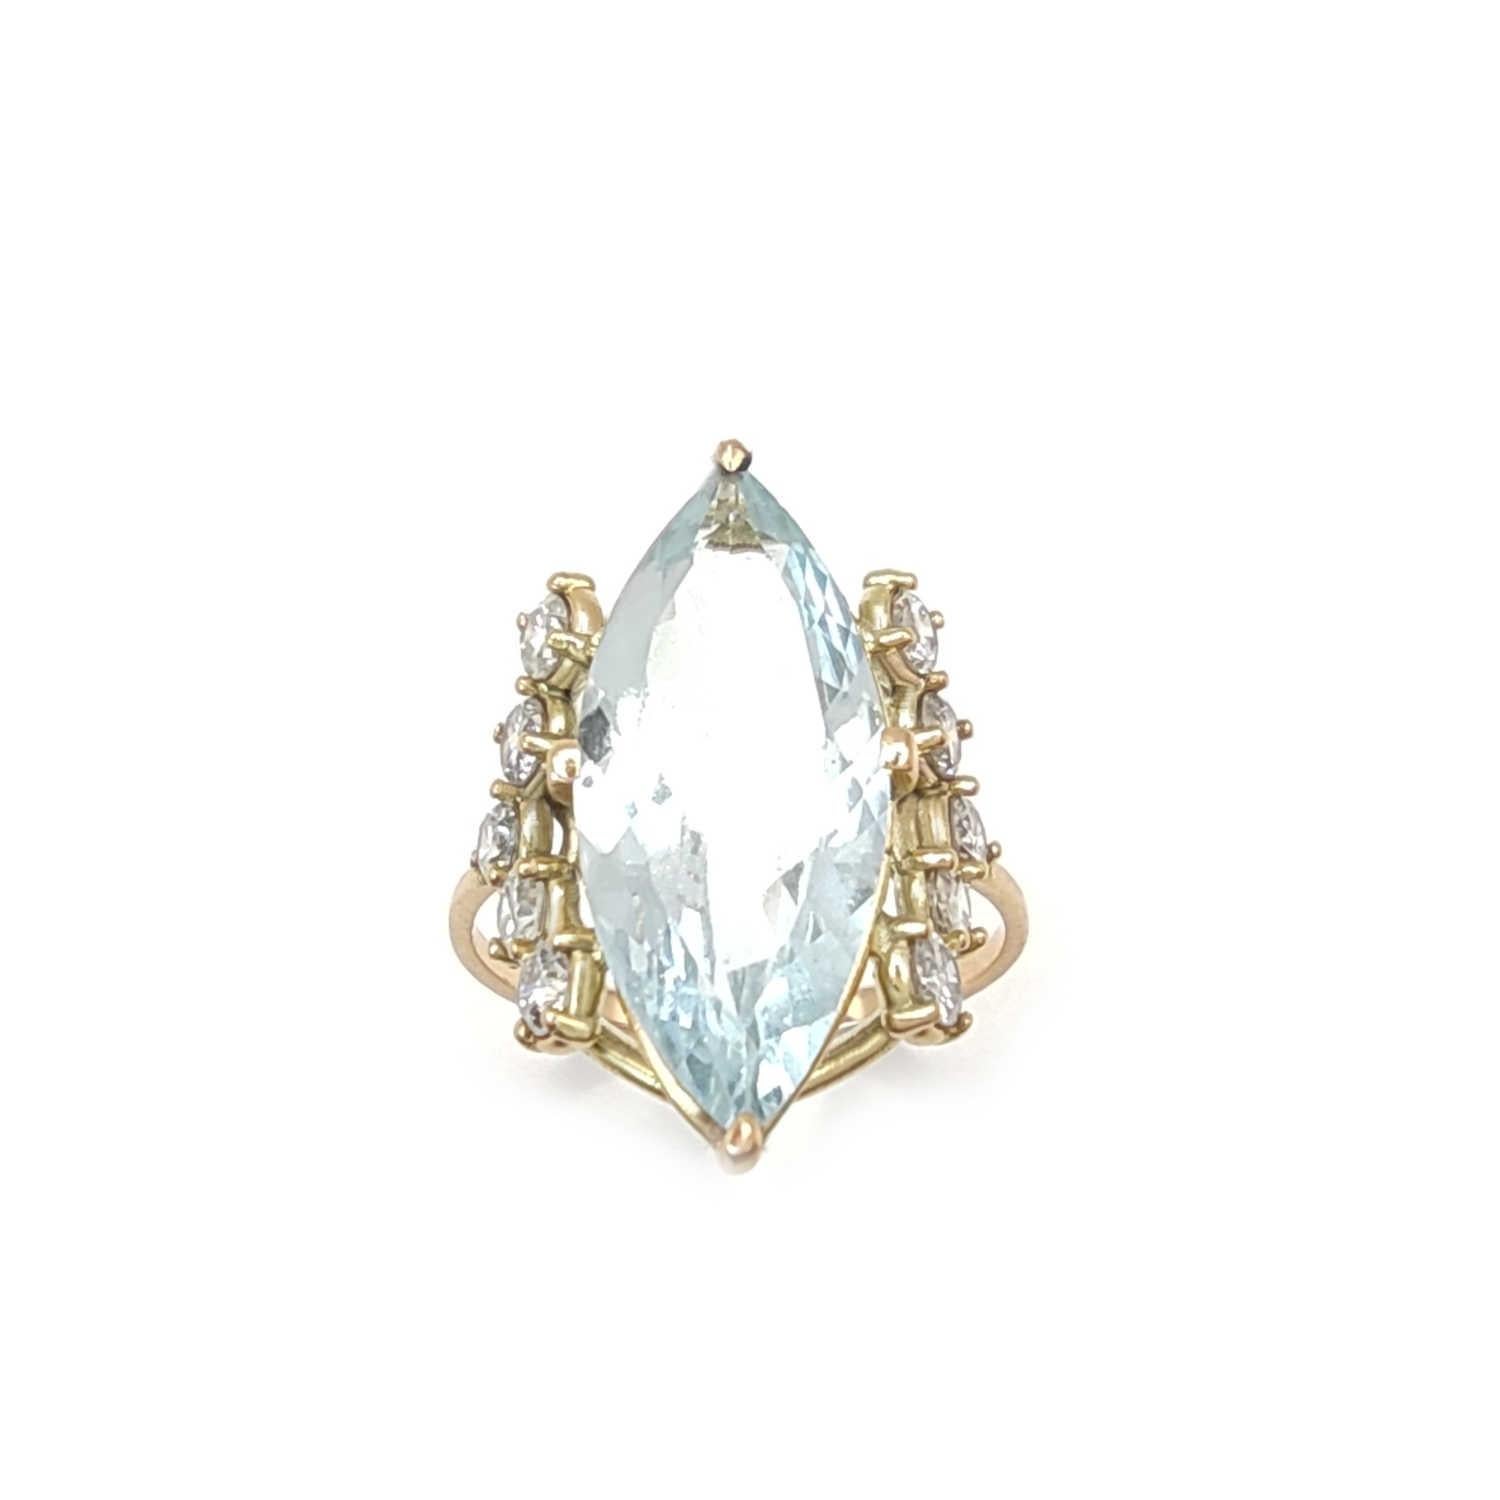 Certified Aquamarine Diamond Cocktail Ring in 14K Gold - Resizable, Perfect Gift For Sale 2